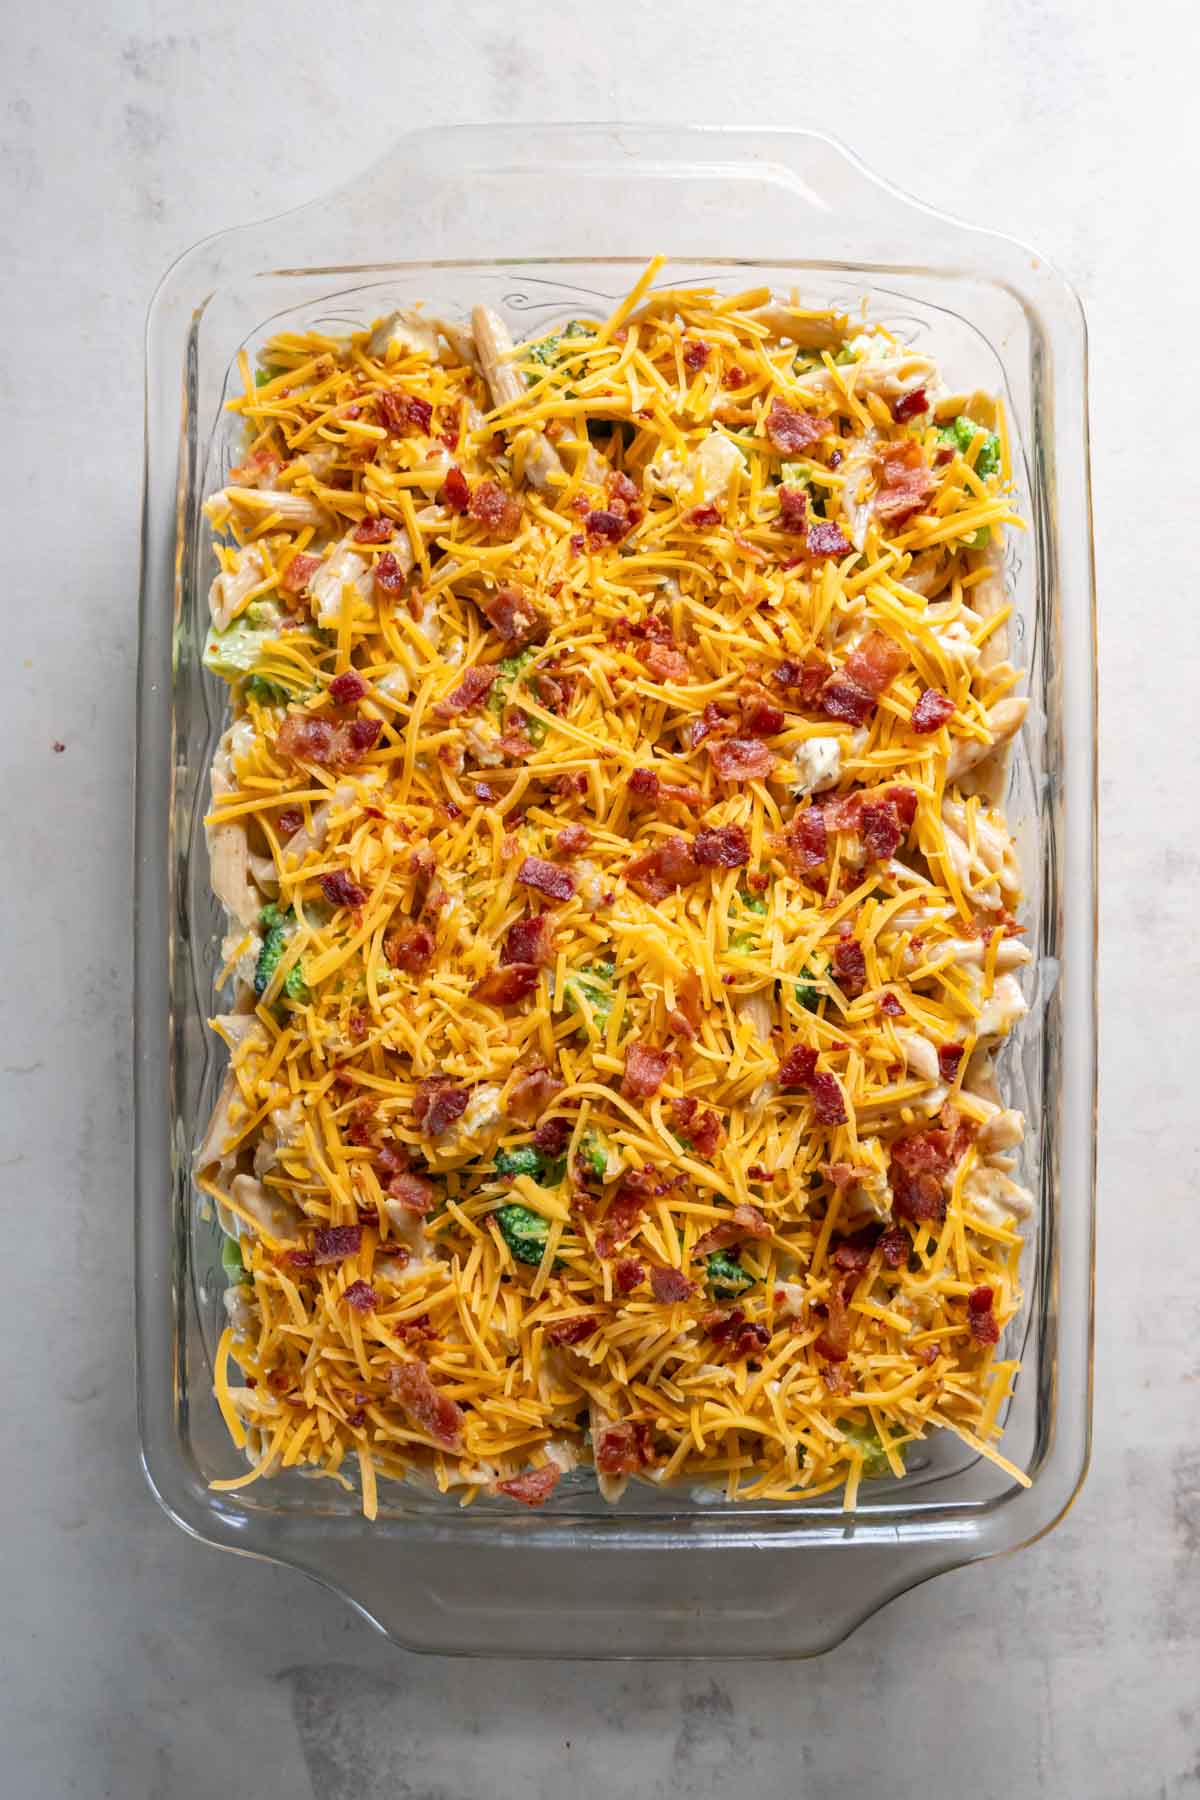 Casserole mixture in baking dish topped with cheese and bacon before baking.